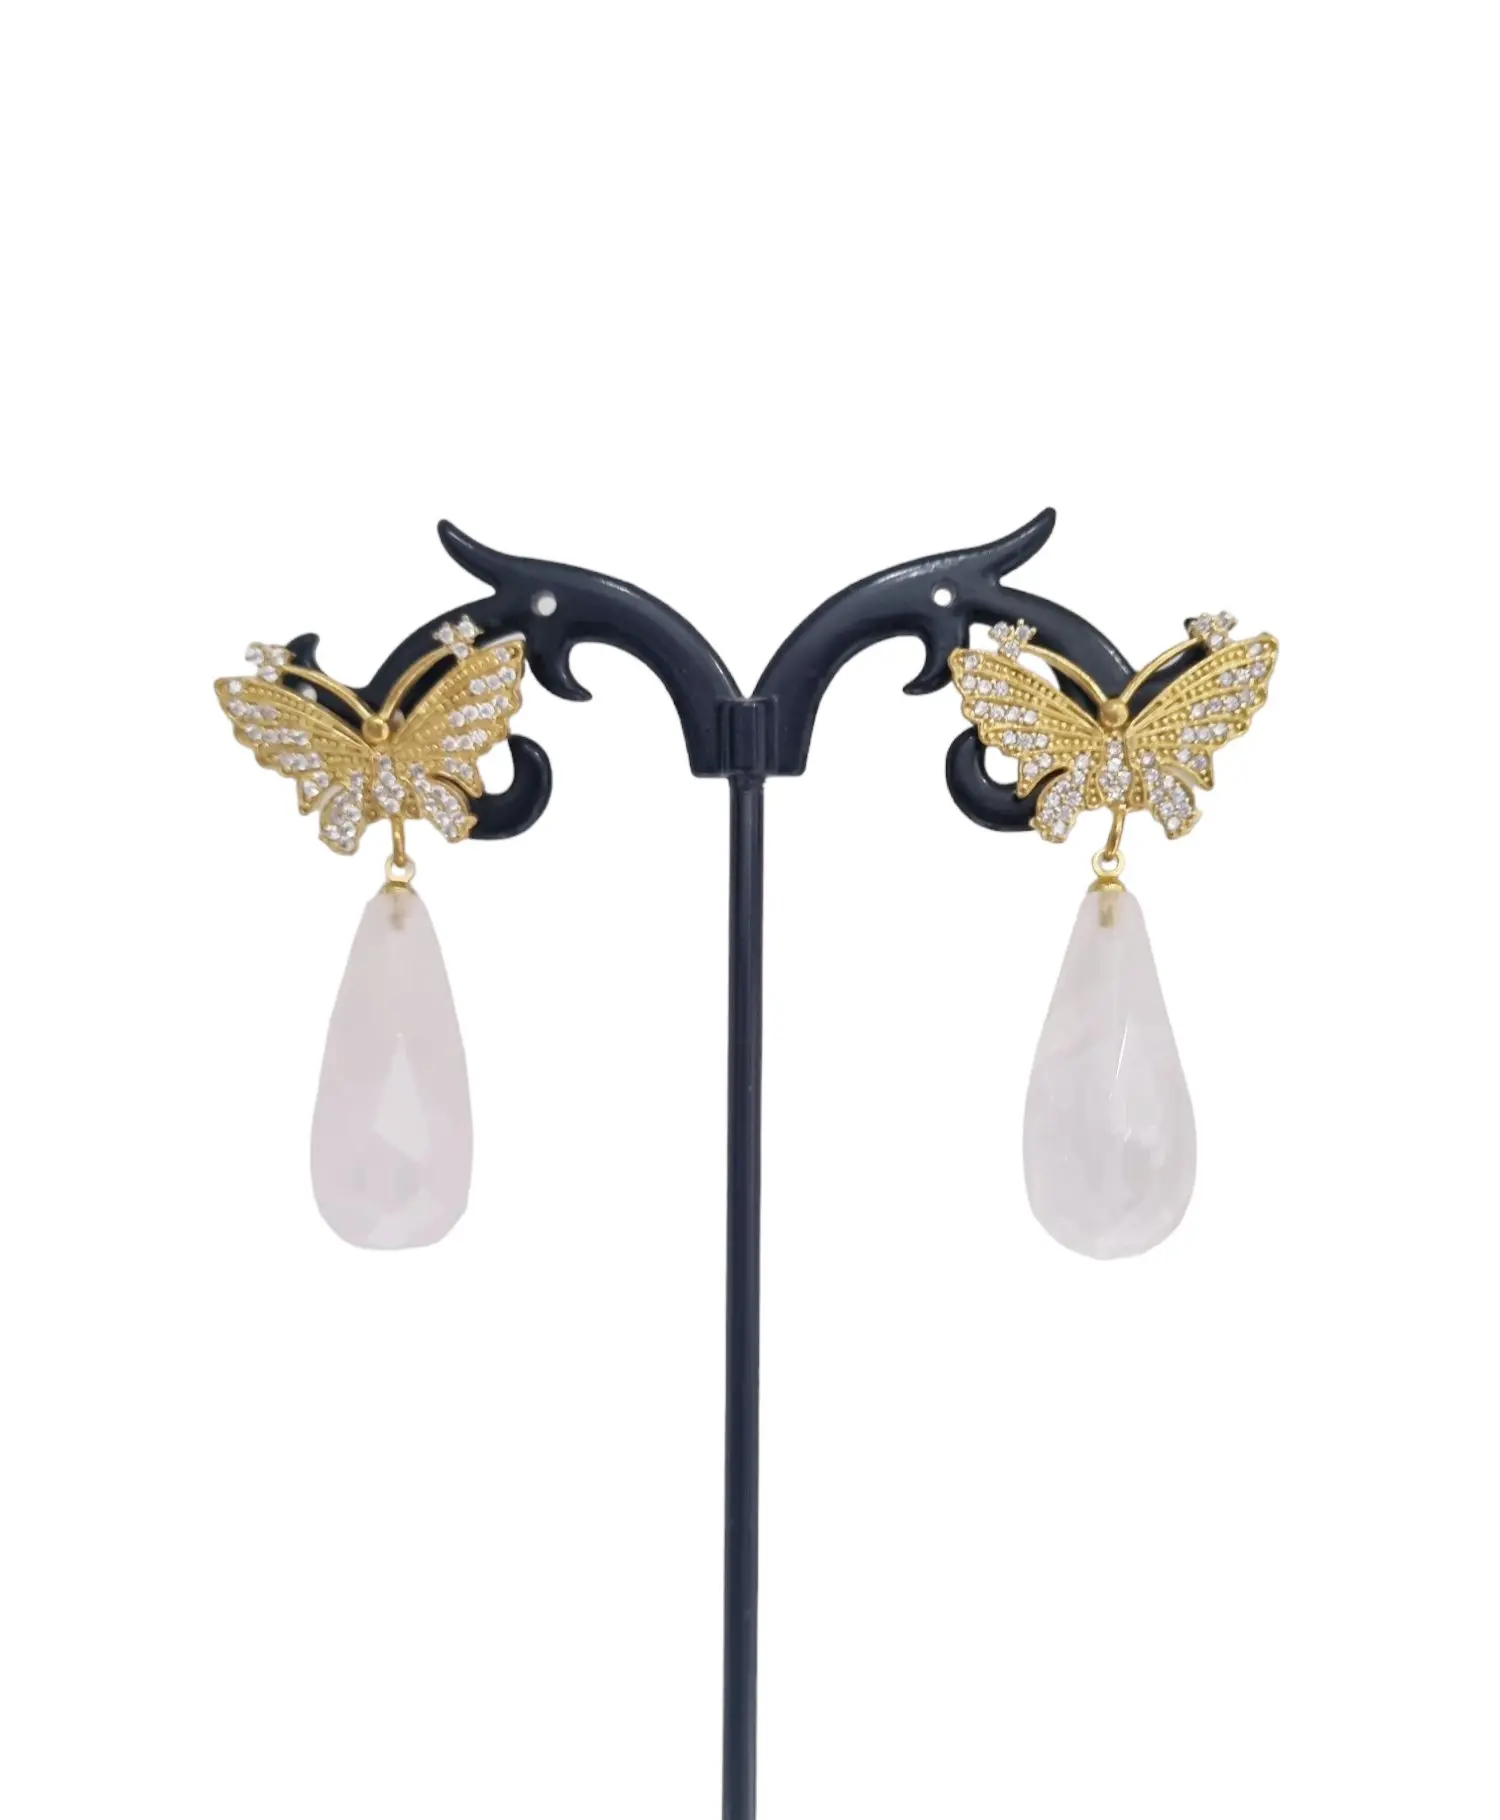 Earrings made with brass butterfly and set zircons, rose quartz drop. Length 4cm Weight 7.1g